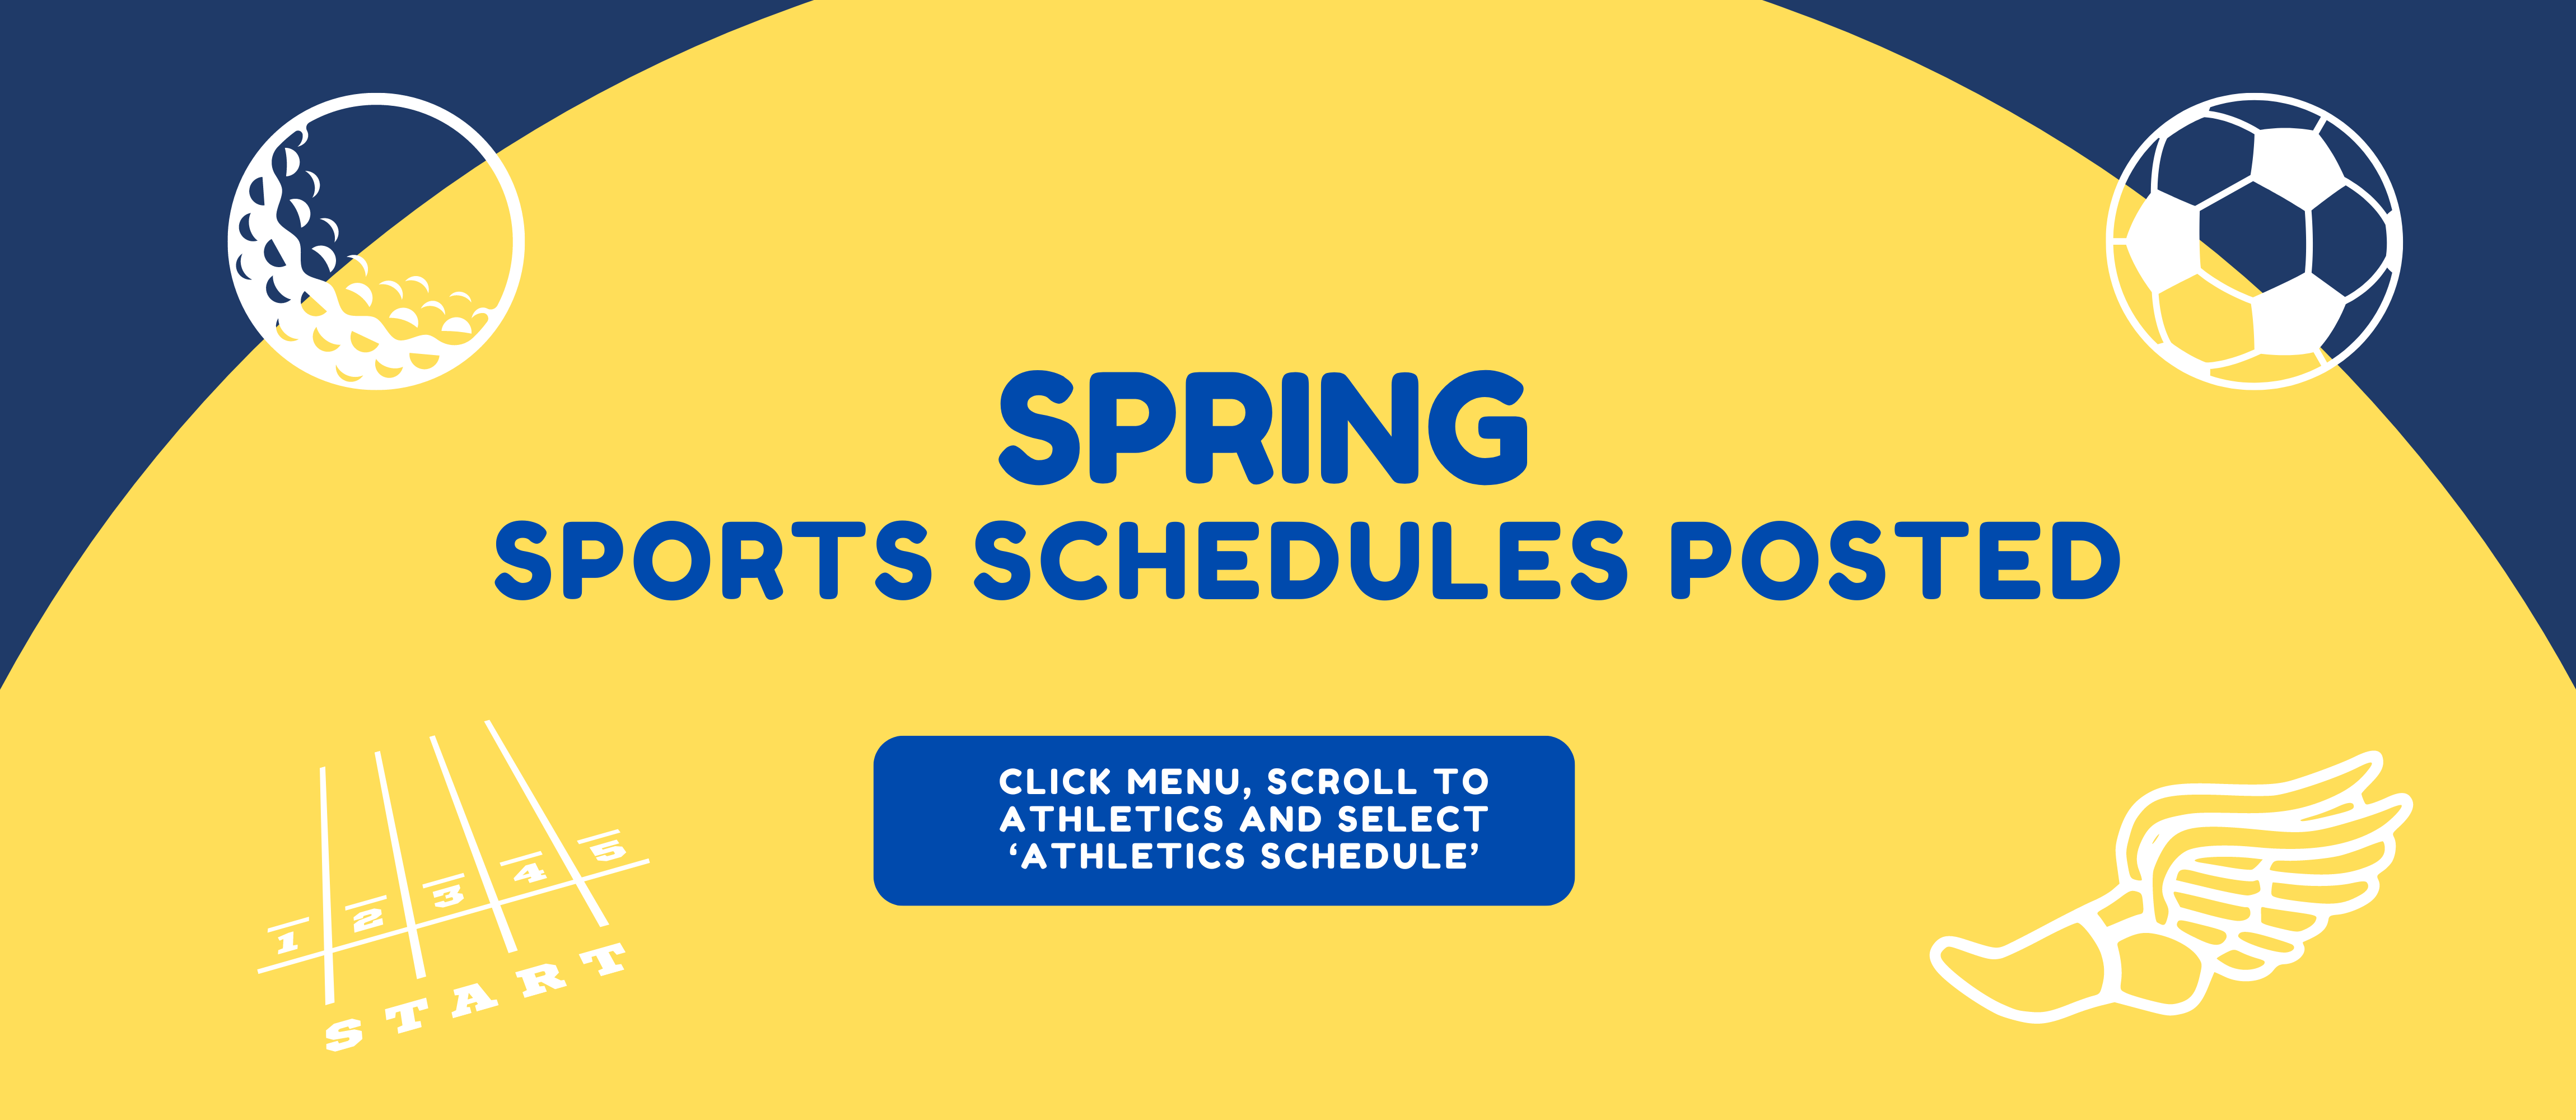 Spring sports schedules are posted